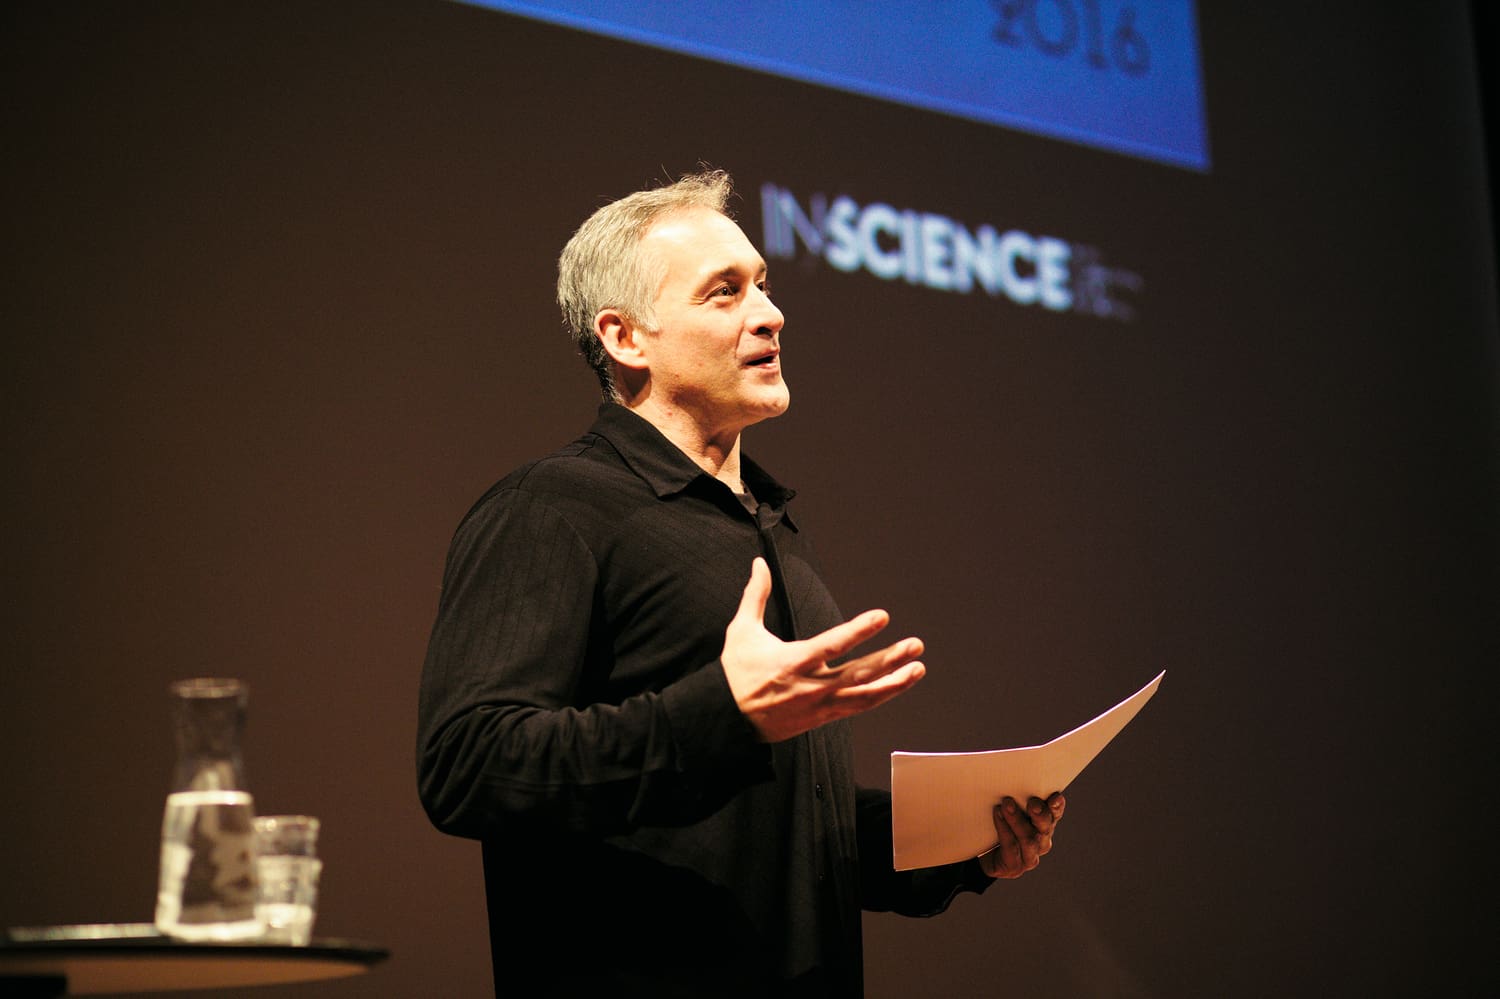 Image of Liberal ASrts chair James Garvey giving a lecture on stage